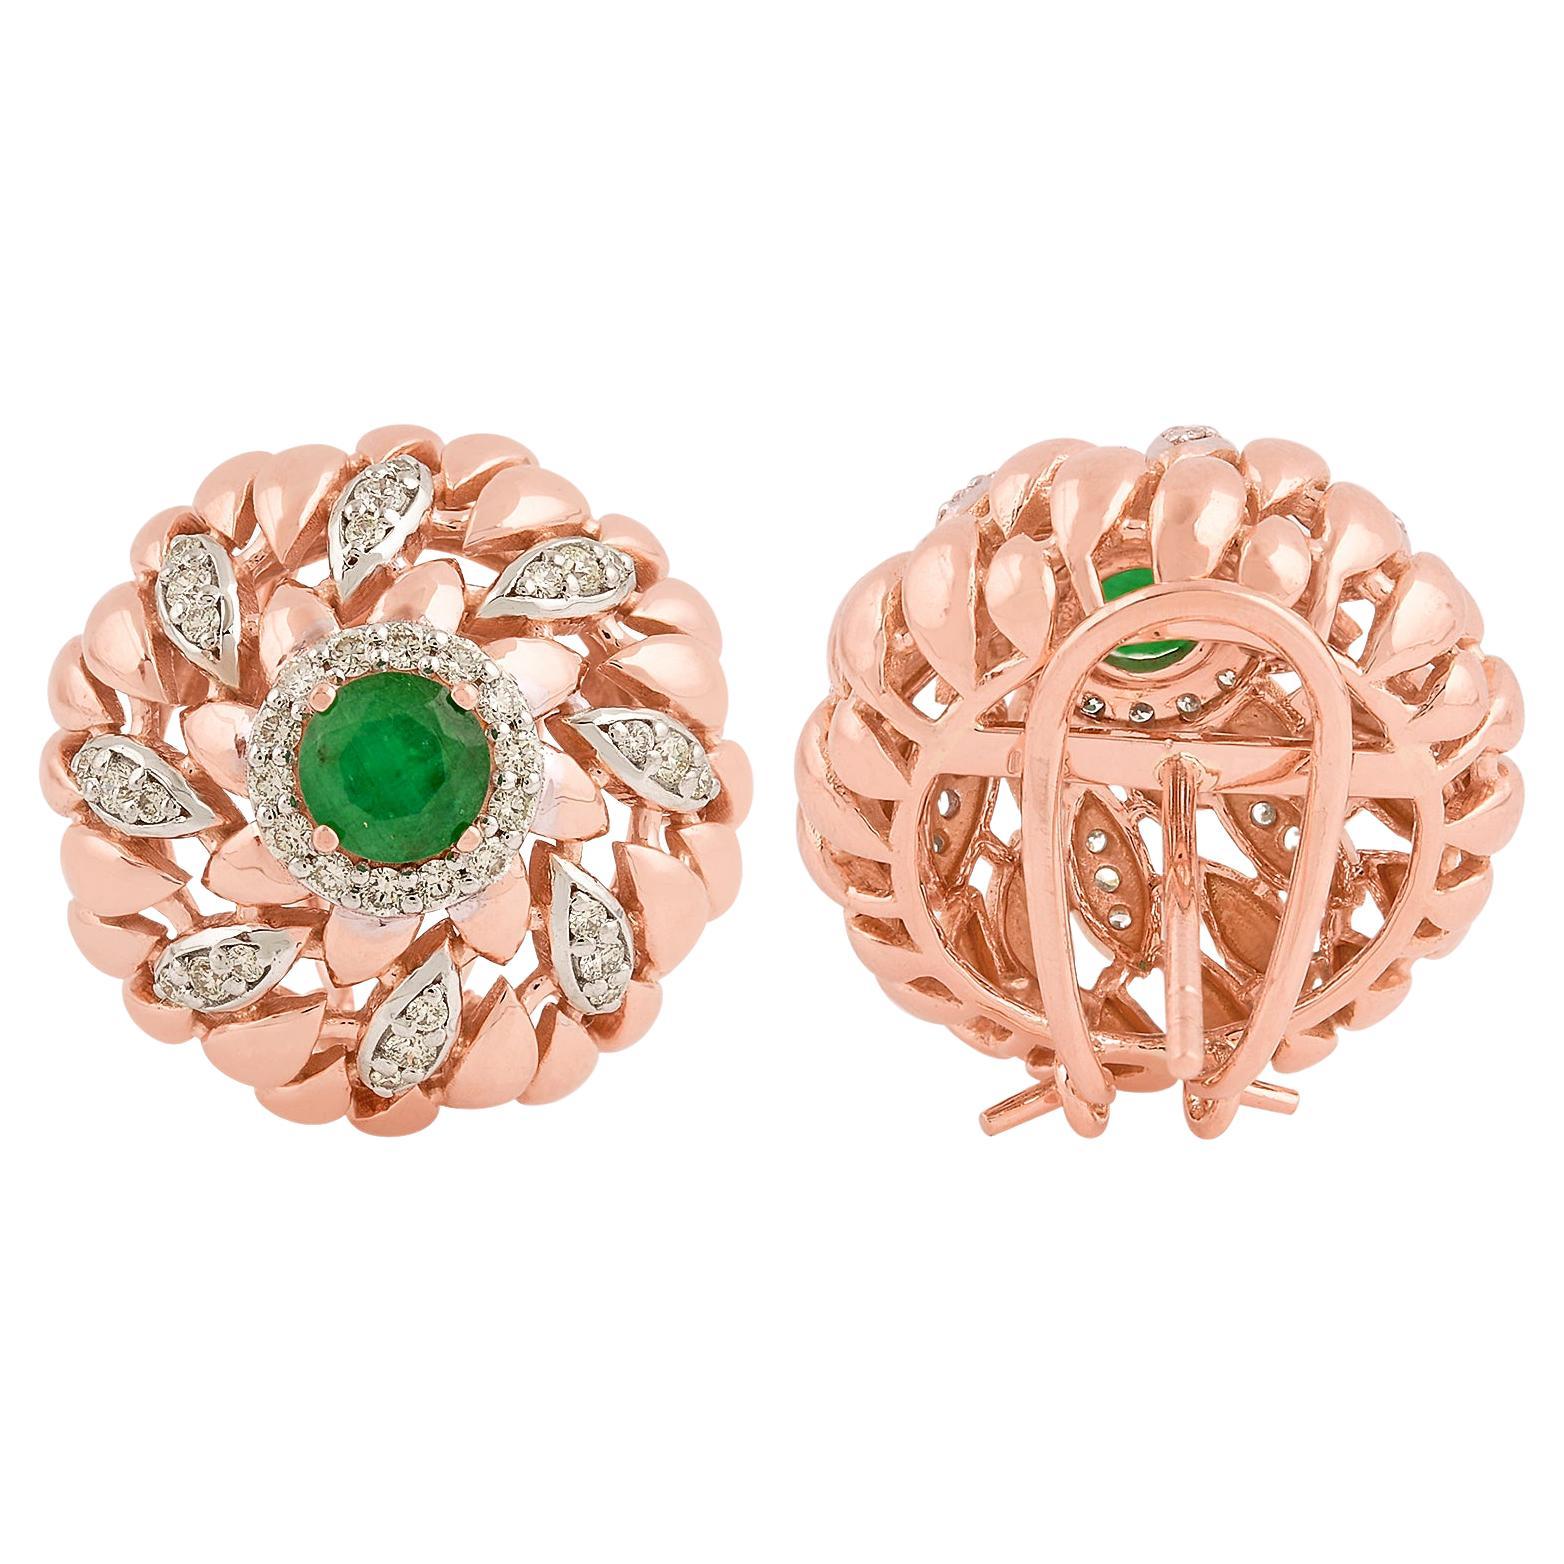 Natural Emerald Gemstone Stud Earrings Diamond Pave Solid 14k Rose Gold Jewelry For Sale